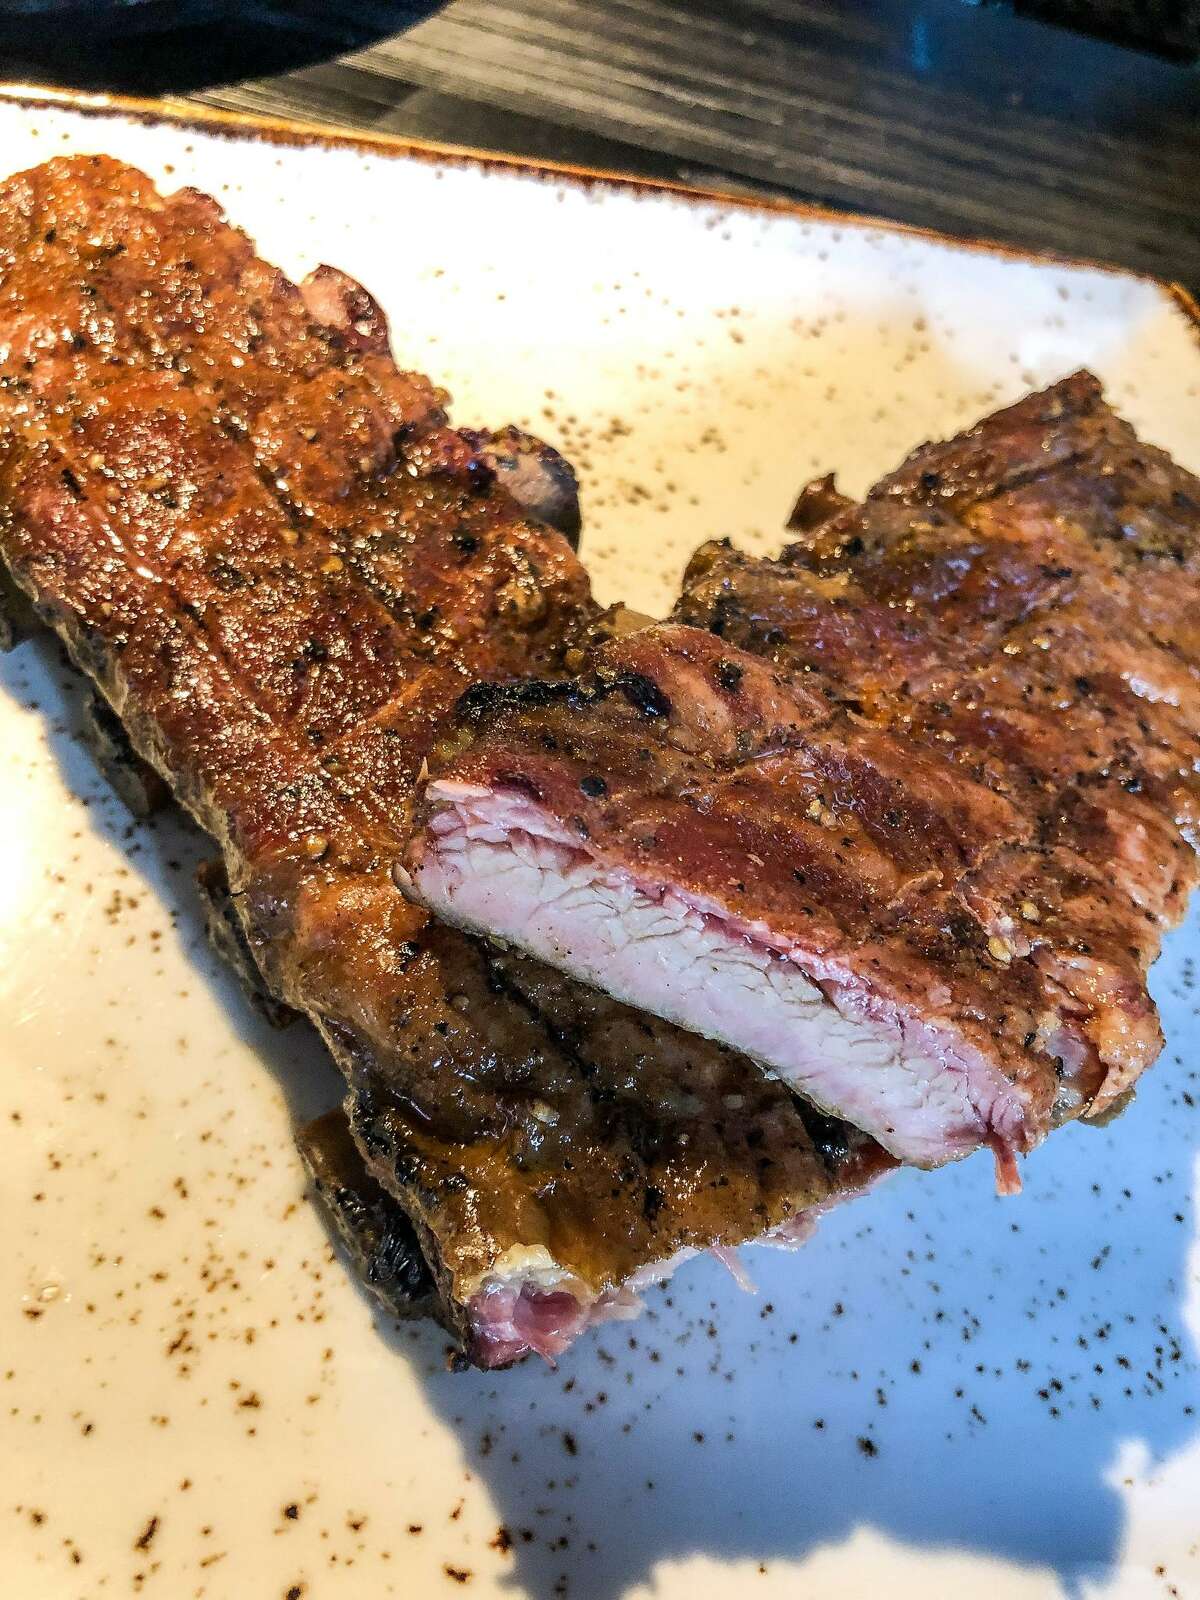 The owners of Blacket, a barbecue restaurant in Como, Italy, was inspired by a trip to Texas where the owners first tasted barbecue. Shown: pork ribs.